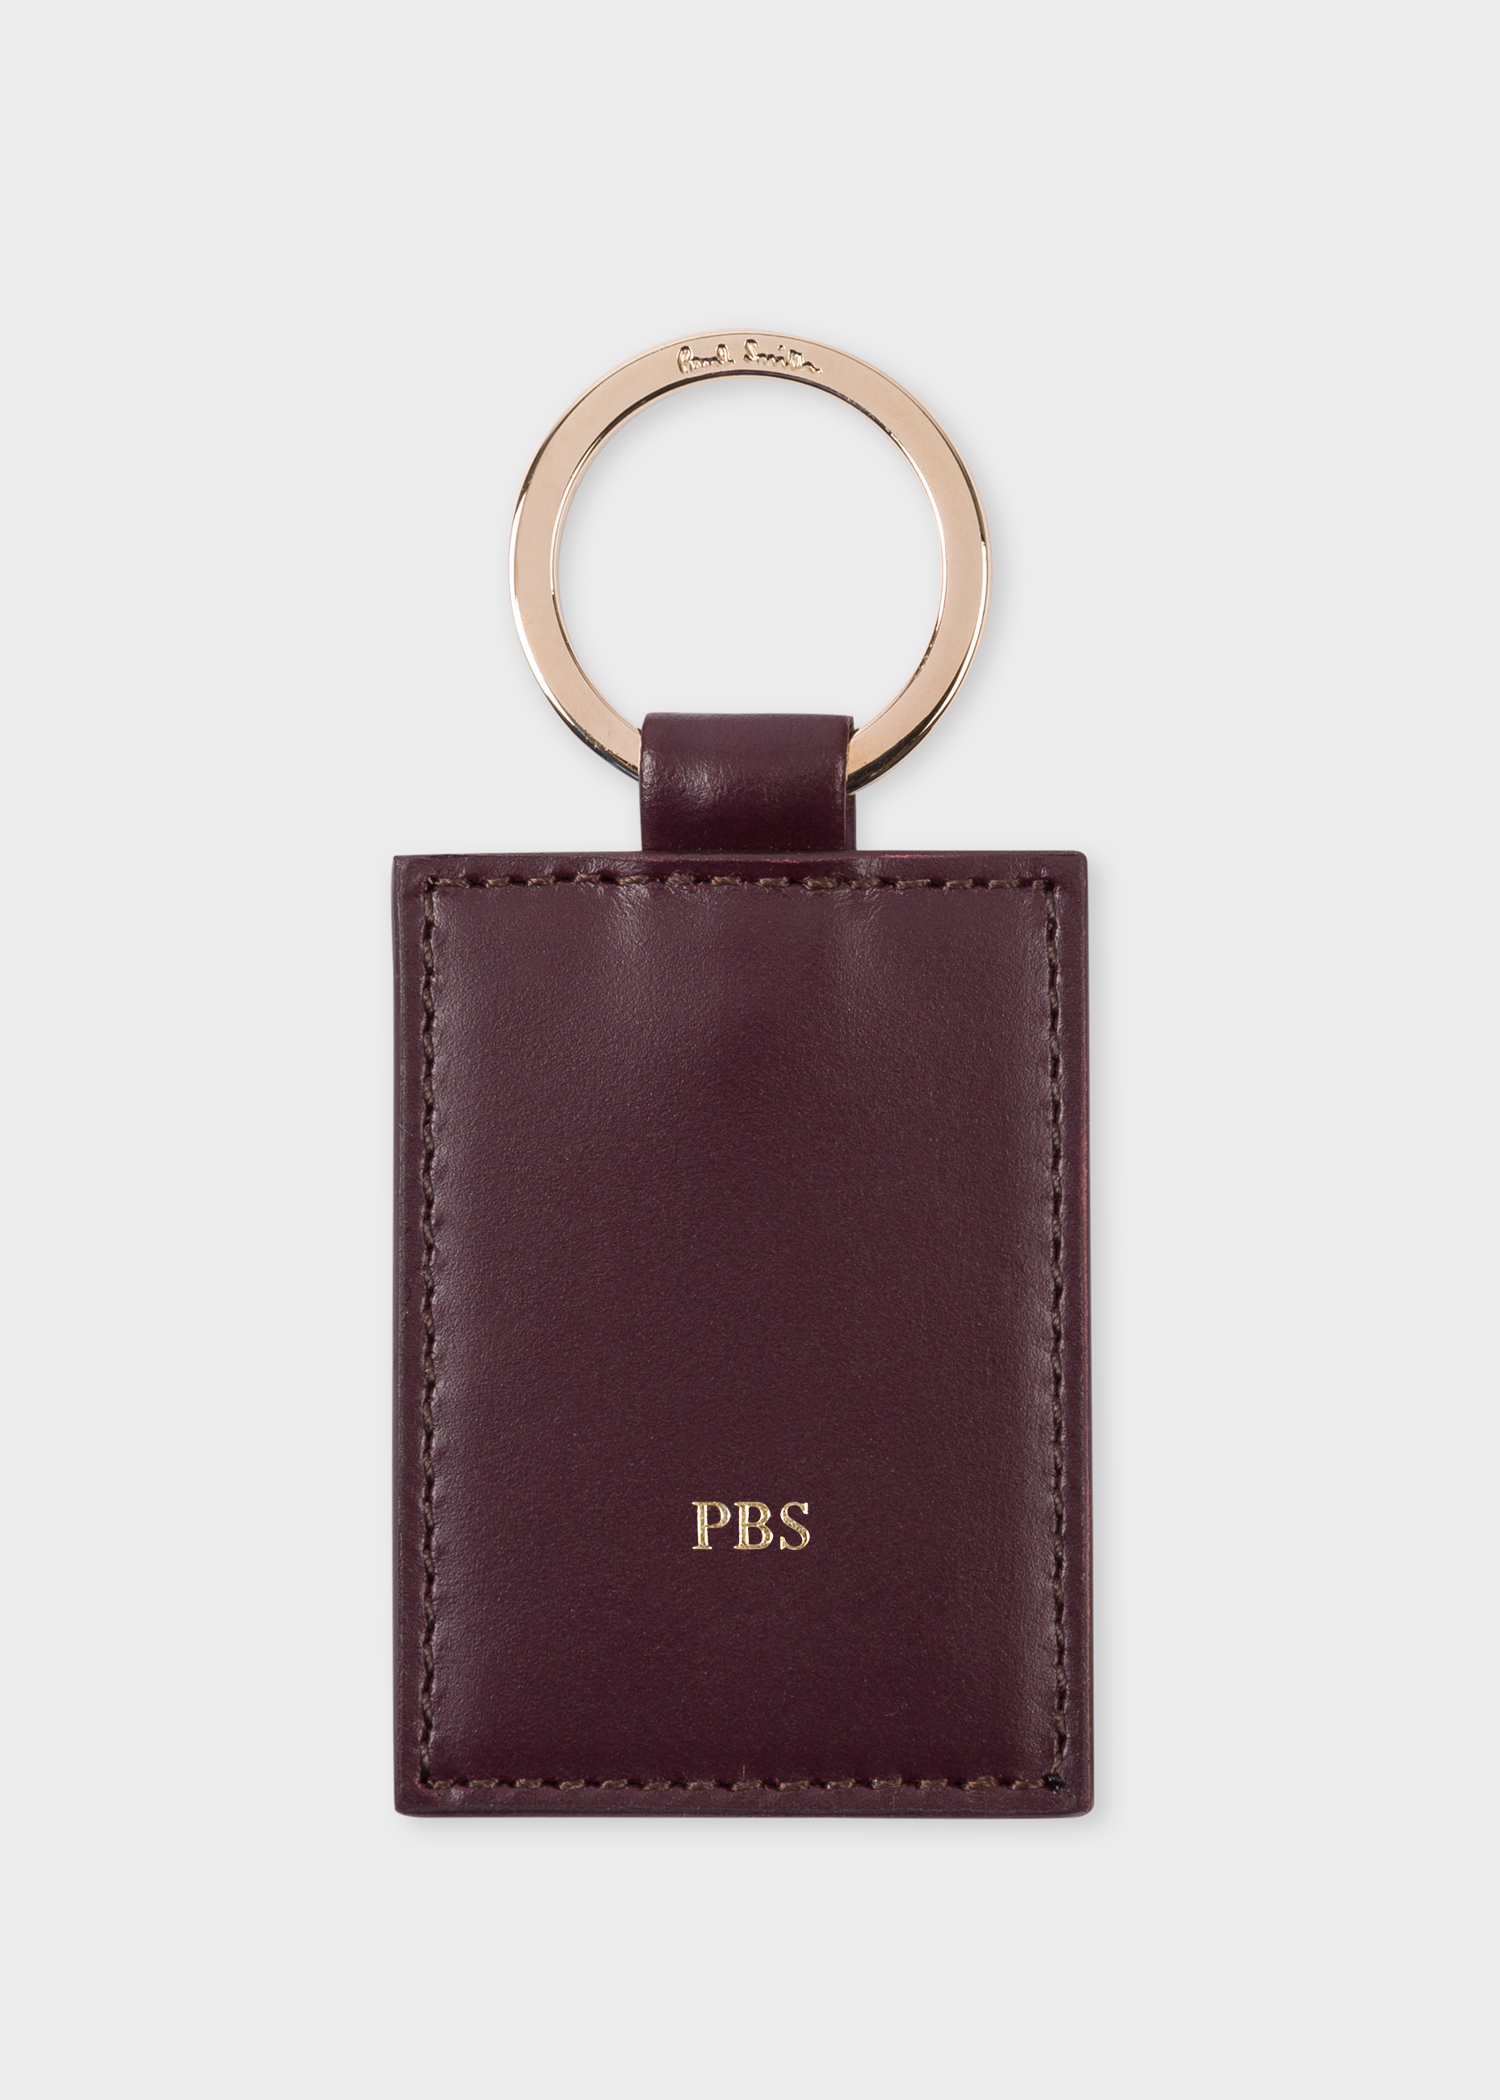 Damson Calf Leather Monogrammed Keyring by Paul Smith